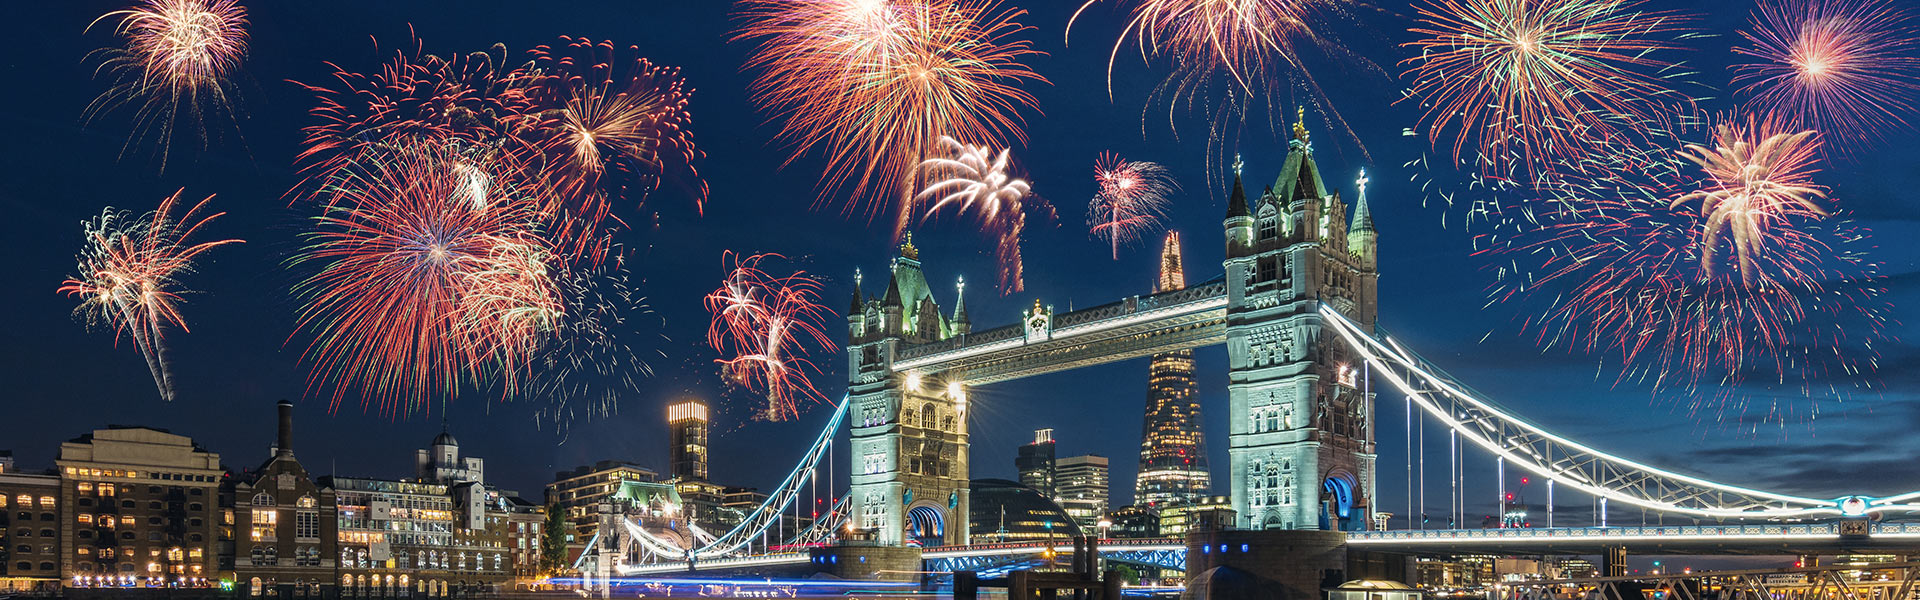 Things to do on New Year’s Eve in London | Big Bus Tours